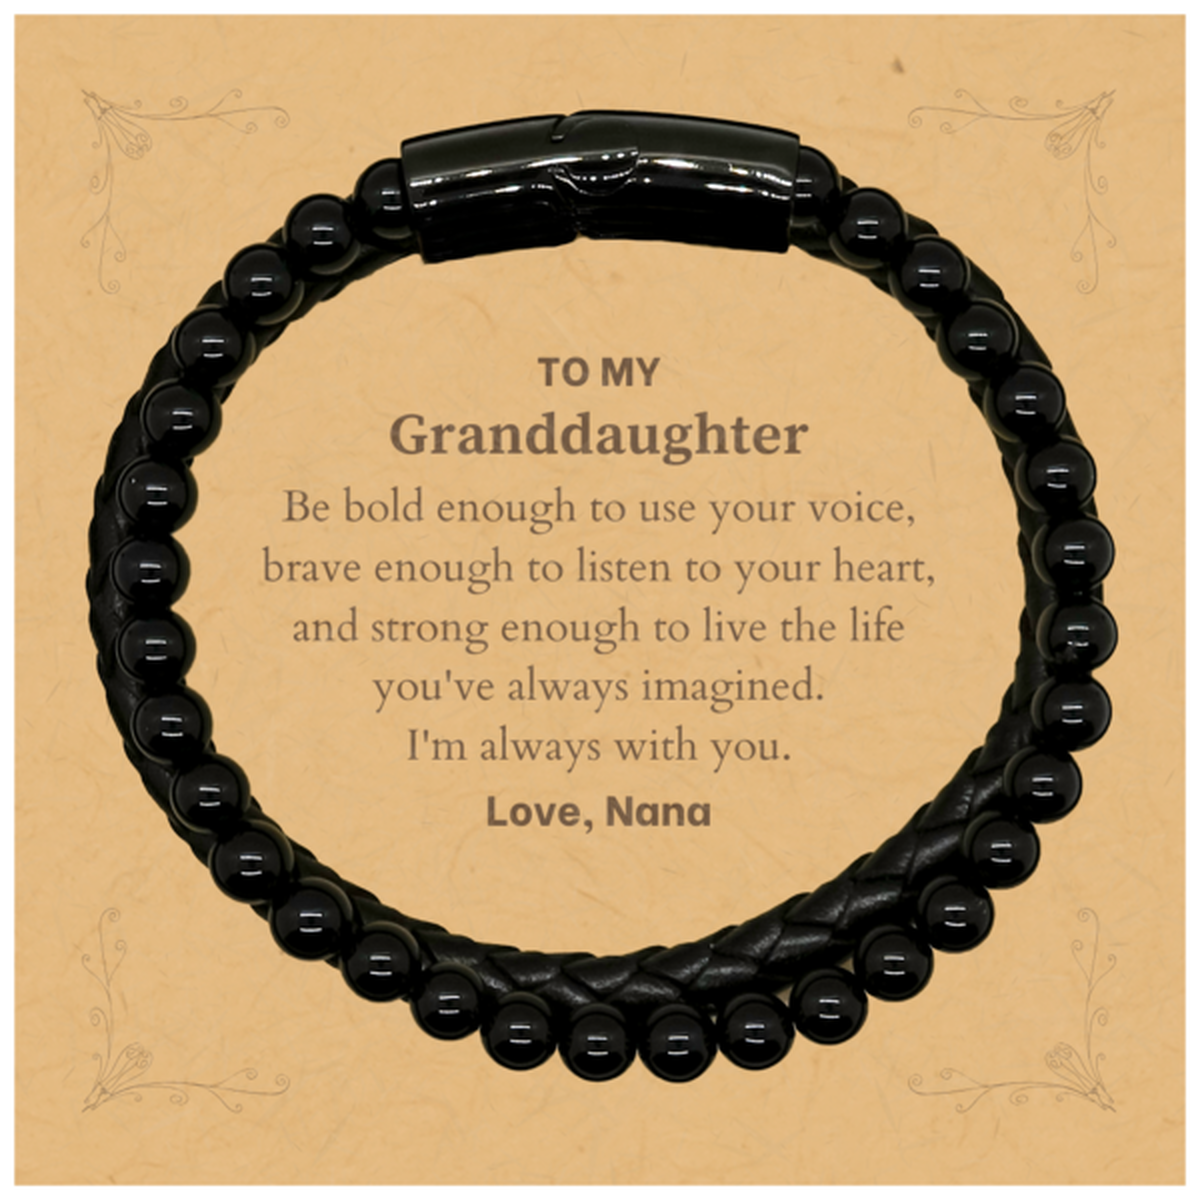 Keepsake Granddaughter Stone Leather Bracelets Gift Idea Graduation Christmas Birthday Granddaughter from Nana, Granddaughter Be bold enough to use your voice, brave enough to listen to your heart. Love, Nana